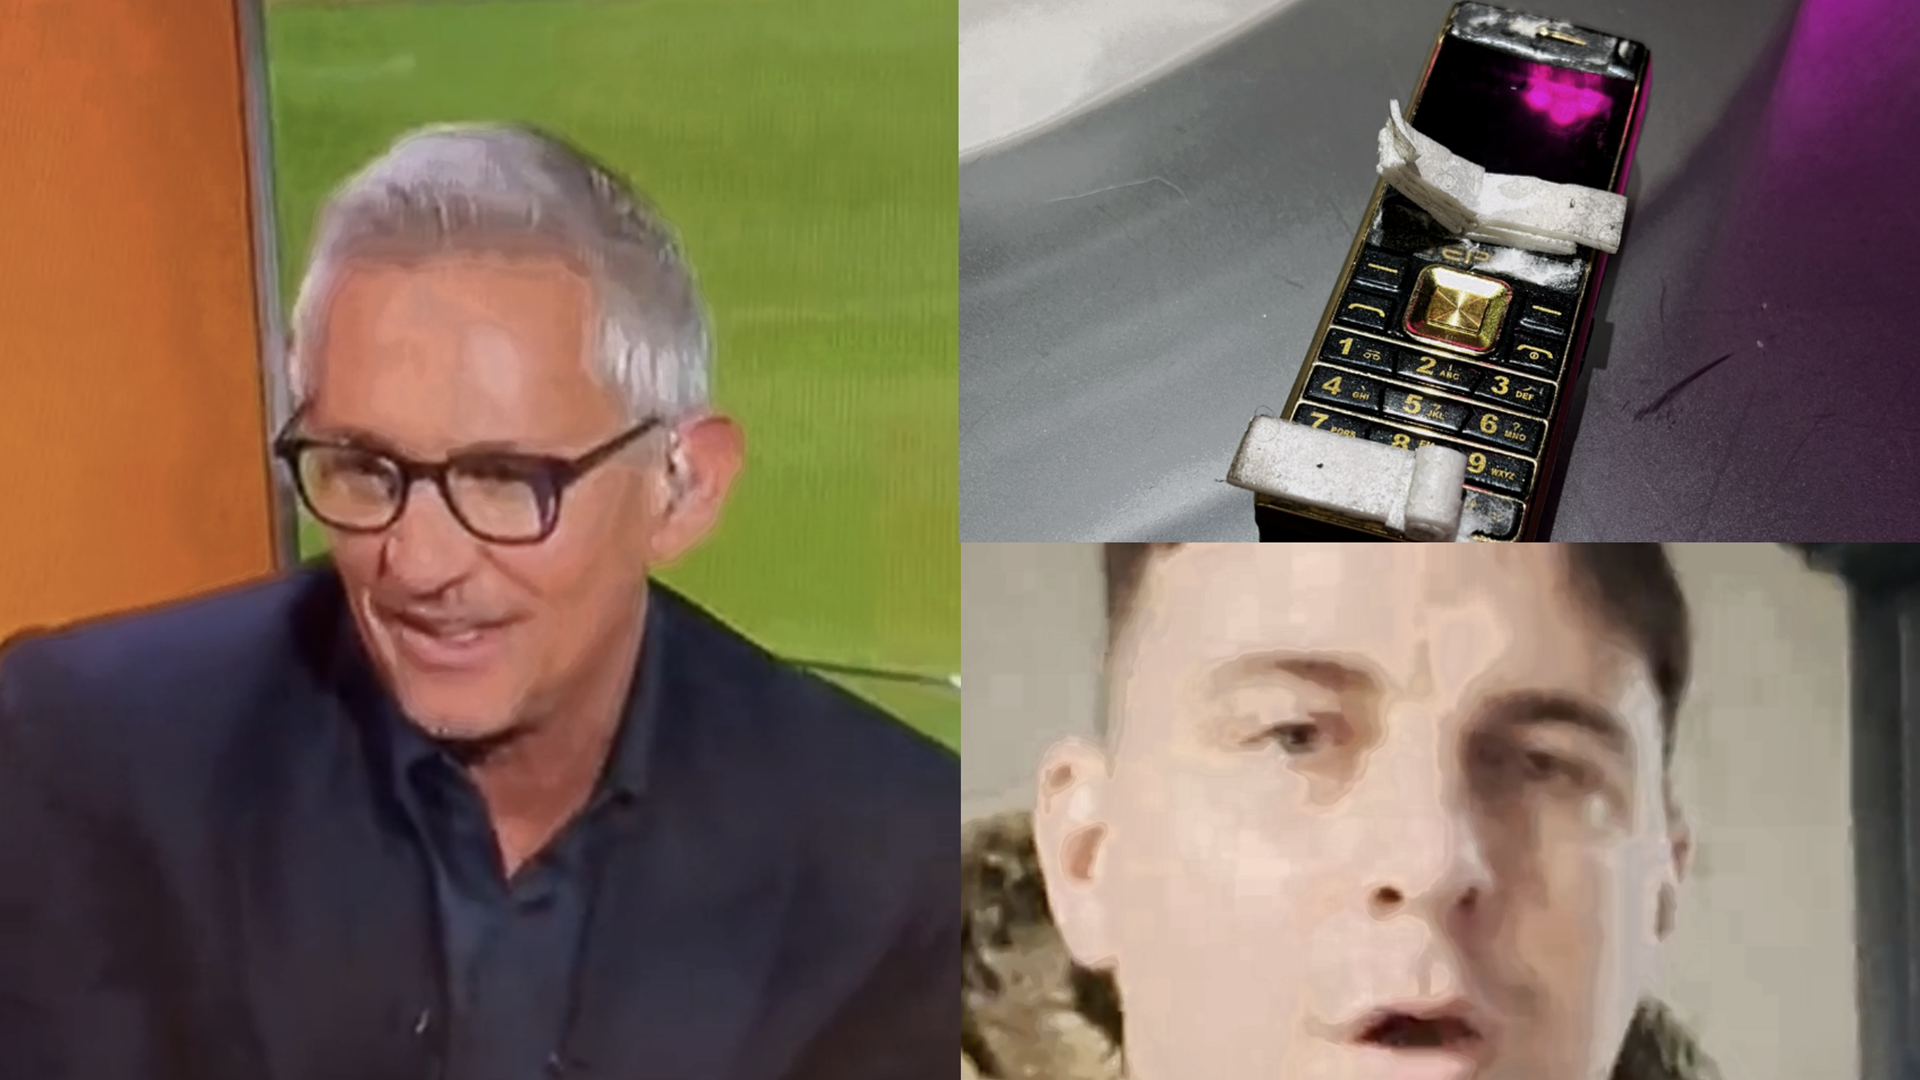 BBC sex-noise culprit revealed! Notorious prankster claims responsibility for broadcasting porn audio on live TV before Liverpool FA Cup match Goal UK